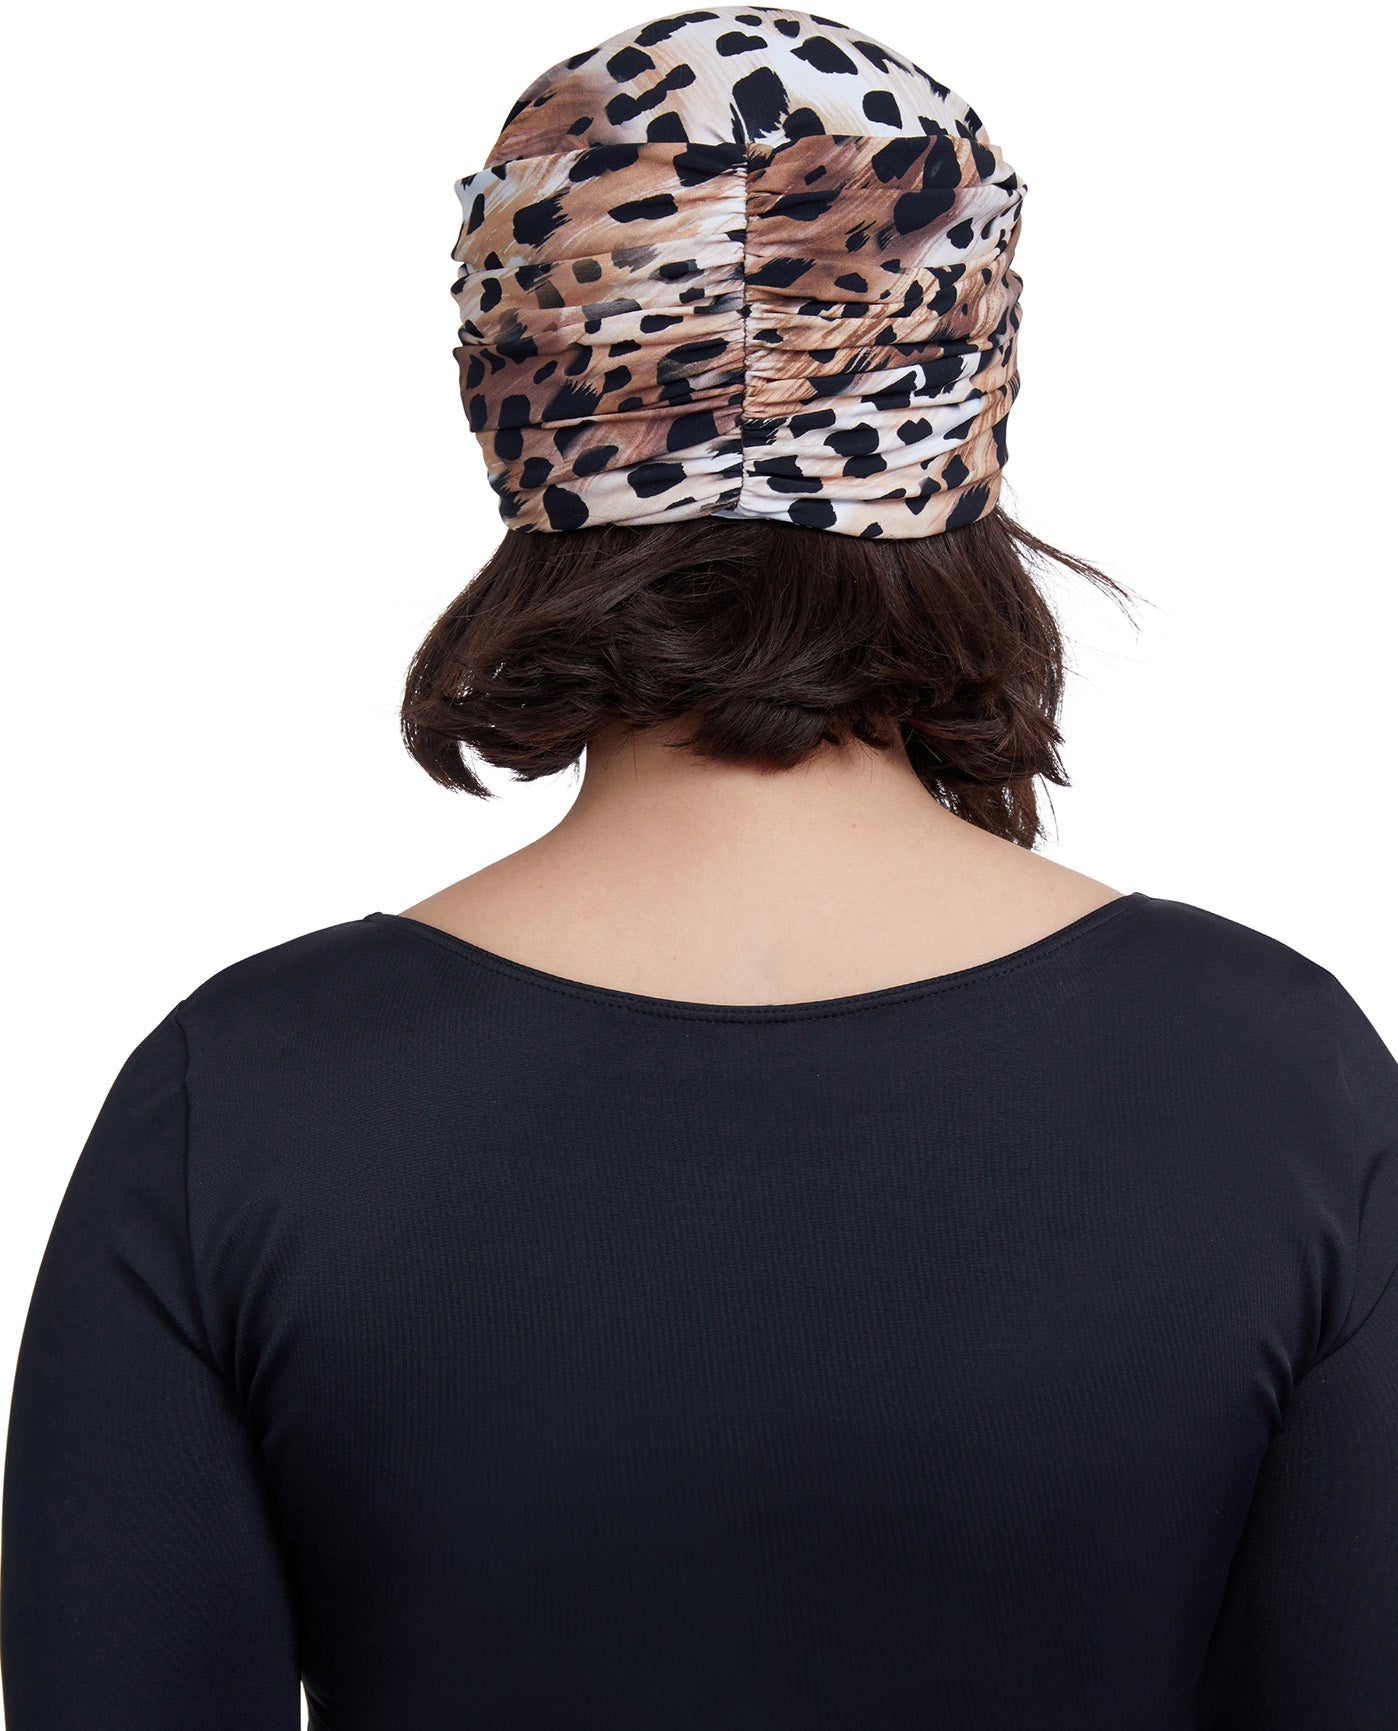 Back View Of Gottex Modest Knotted Hair Covering | GOTTEX MODEST LEOPARD